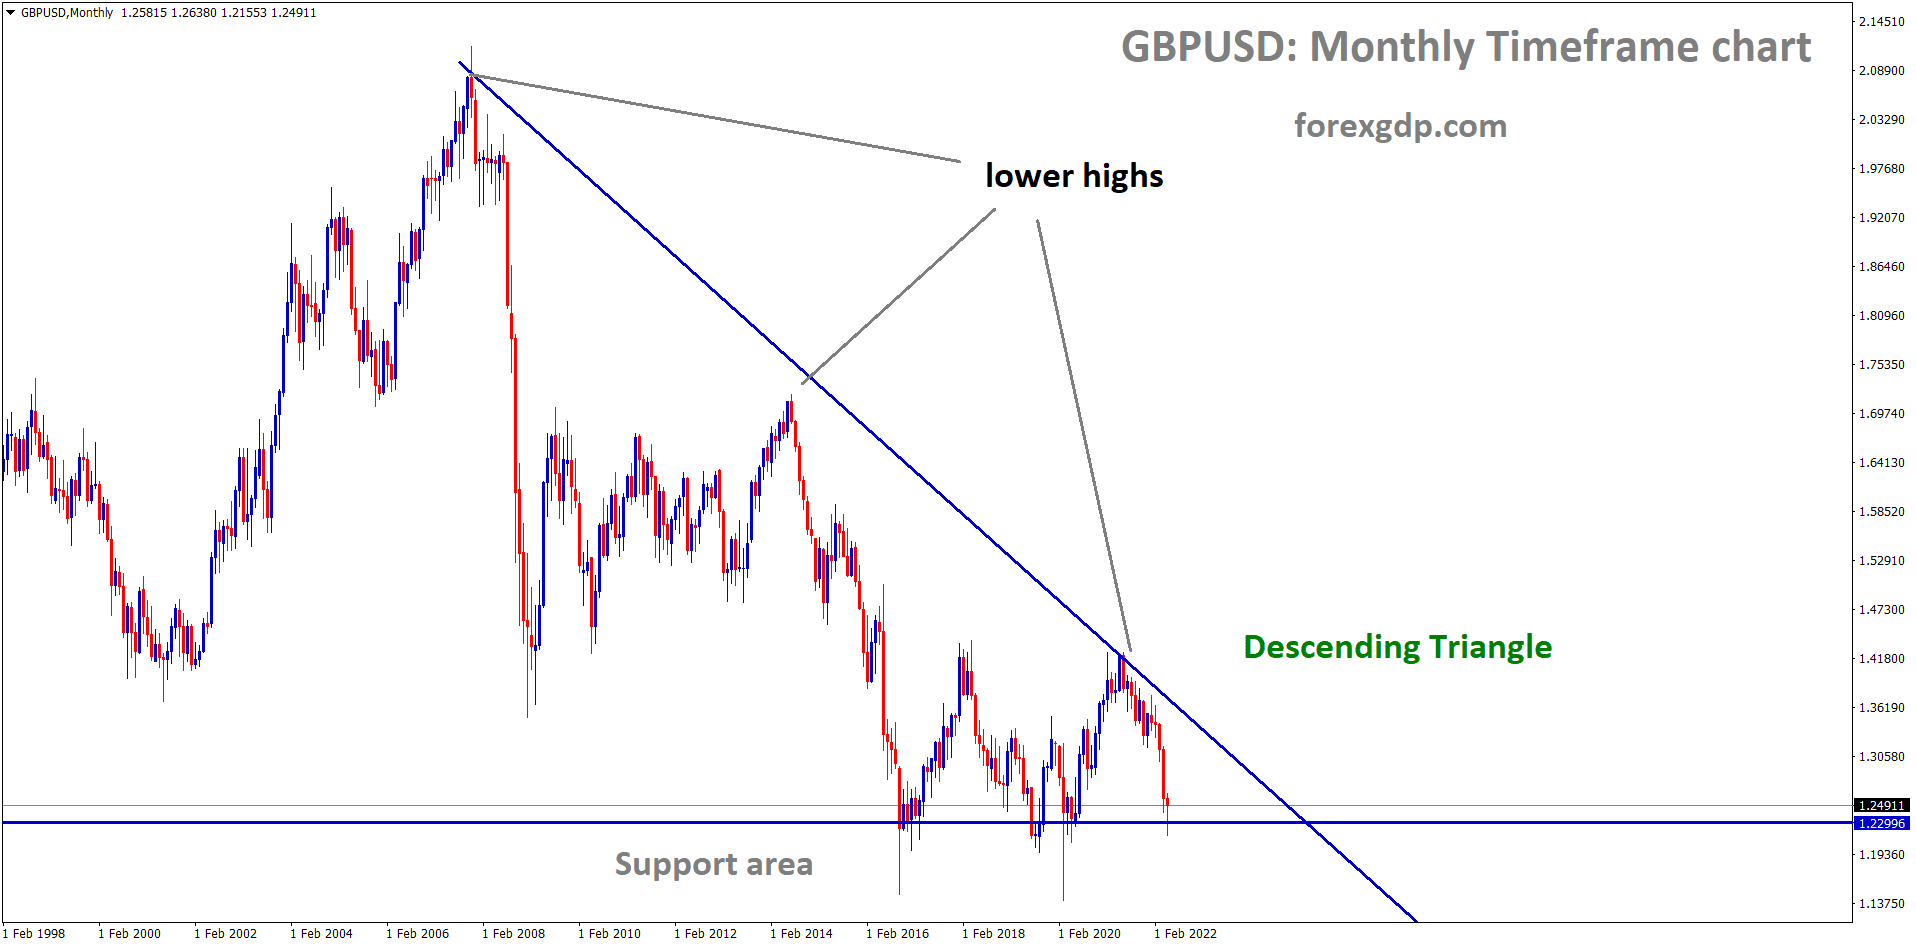 GBPUSD in a downtrend in the monthly timeframe chart